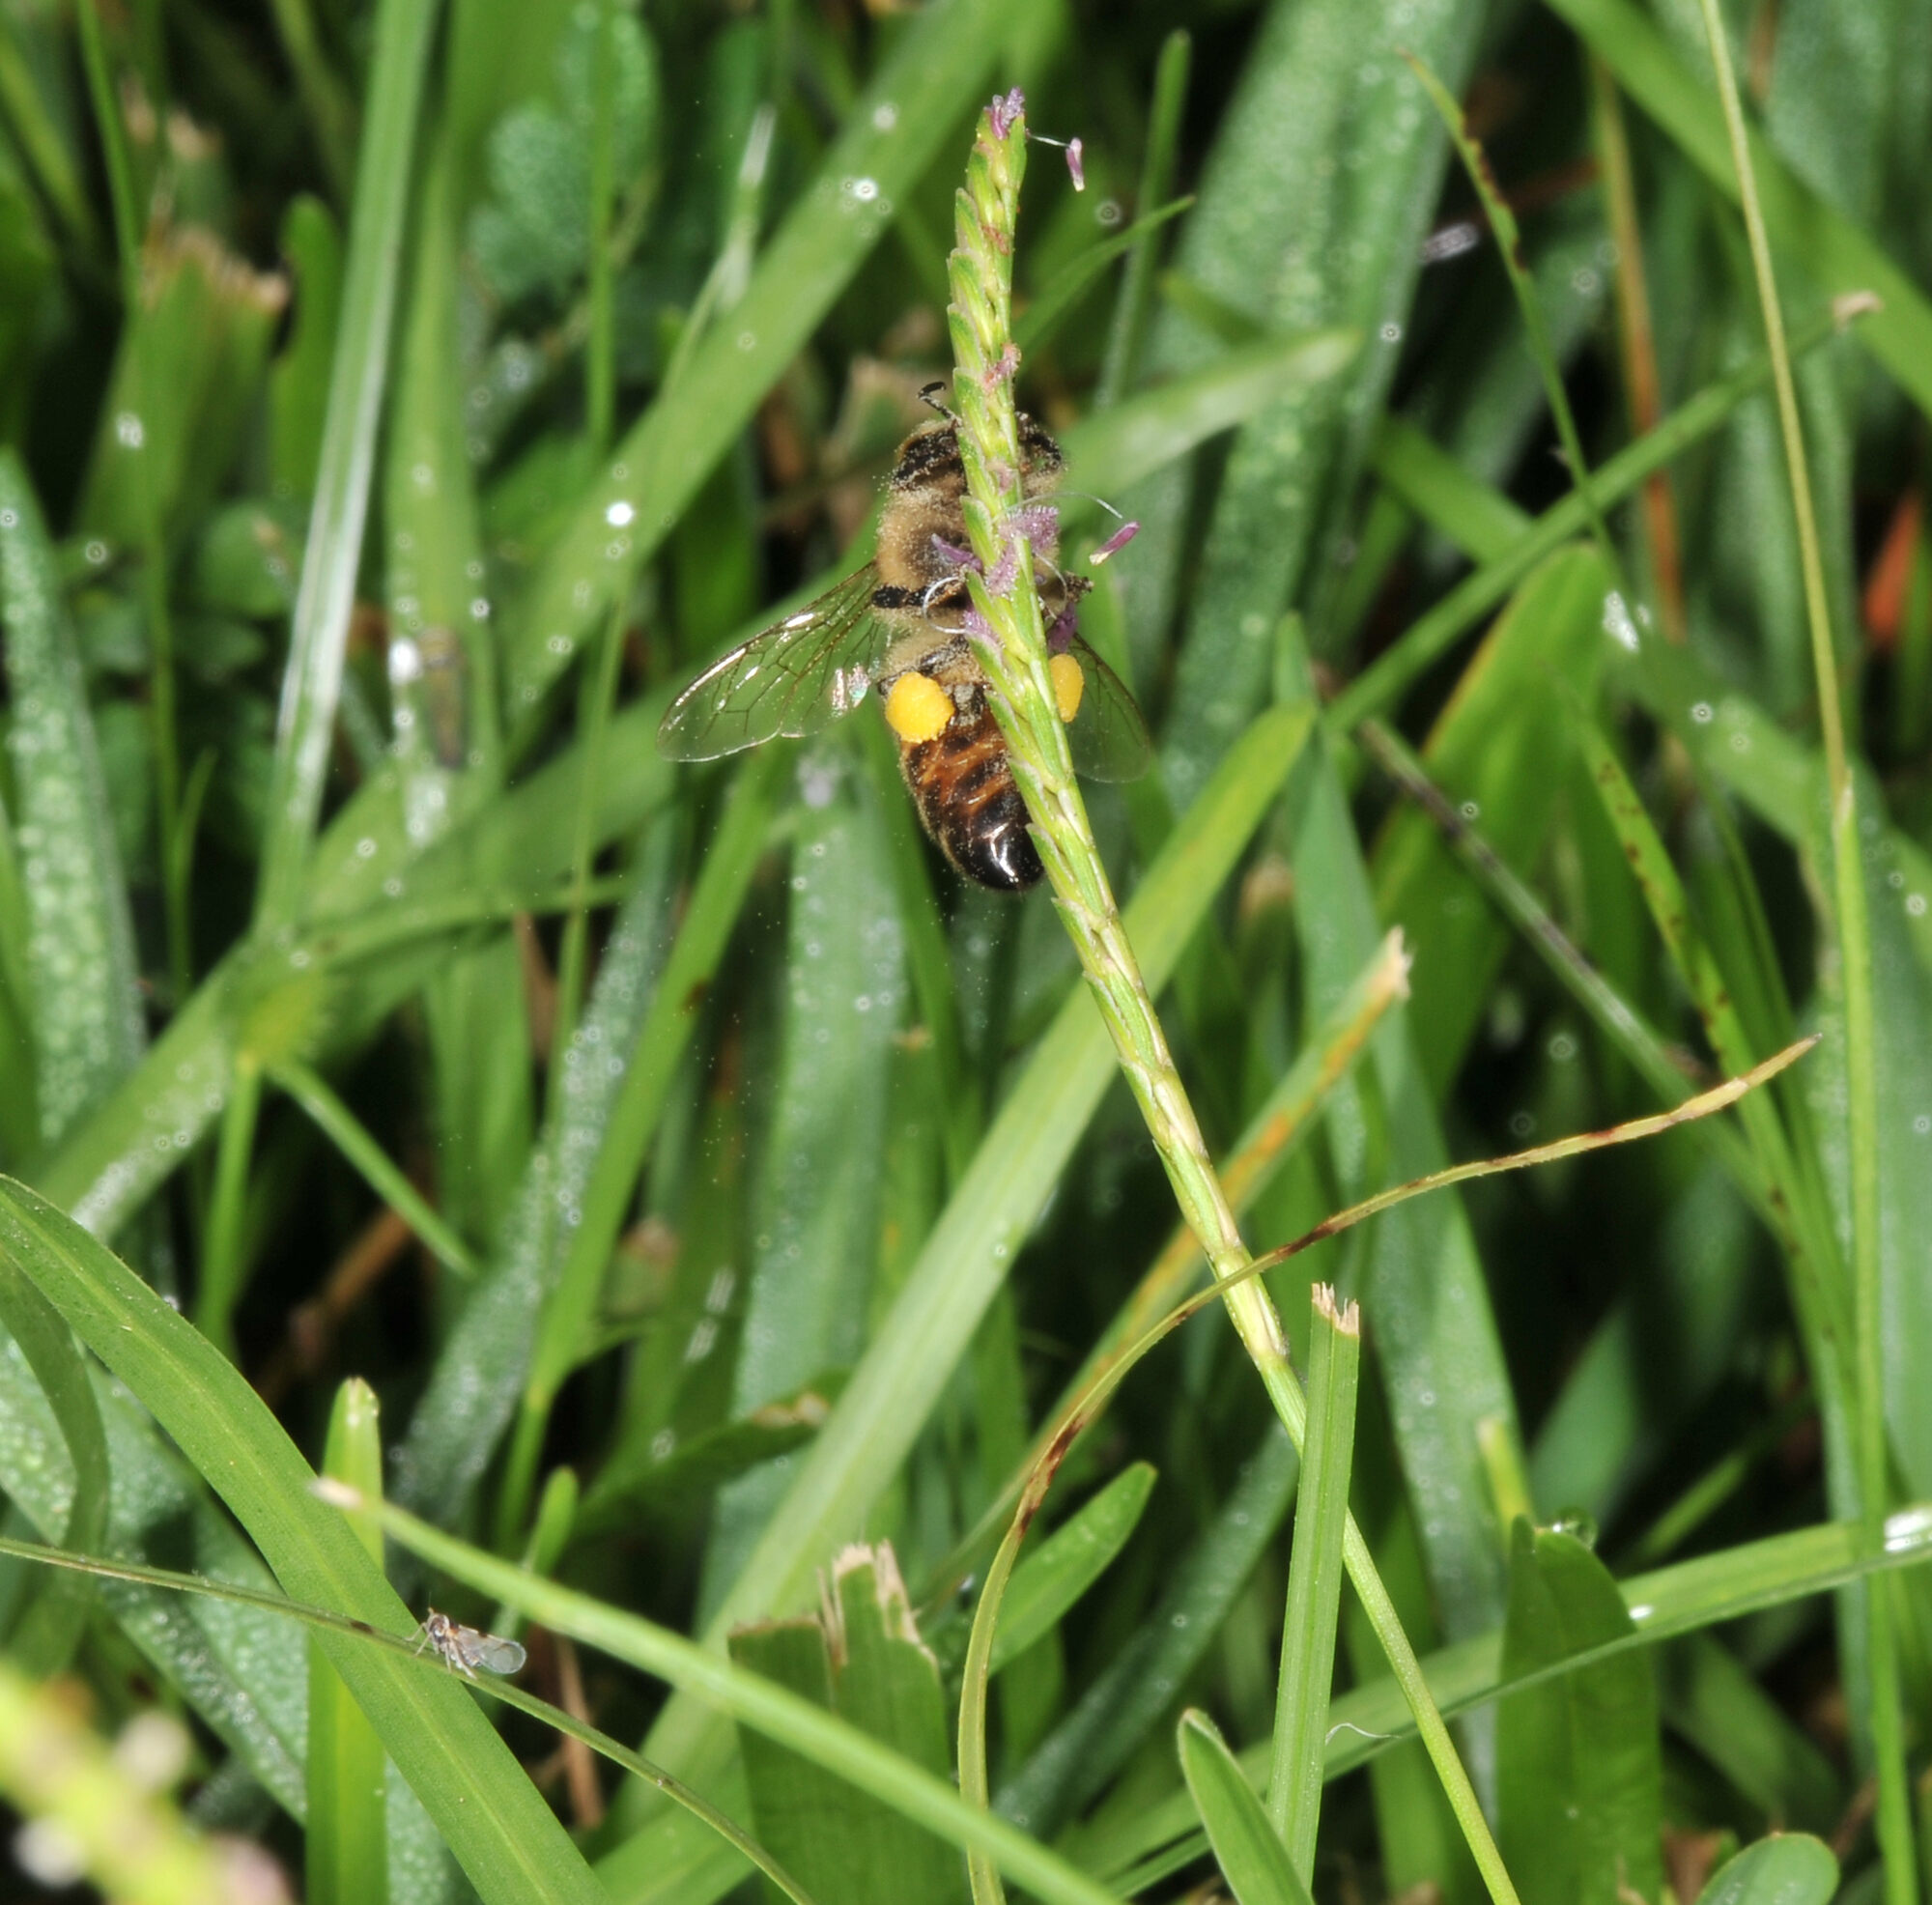 Photograph of a centipede grass inflorescence with a bee resting on it. The bee has pollen baskets on its rear legs that are filled with yellow pollen.